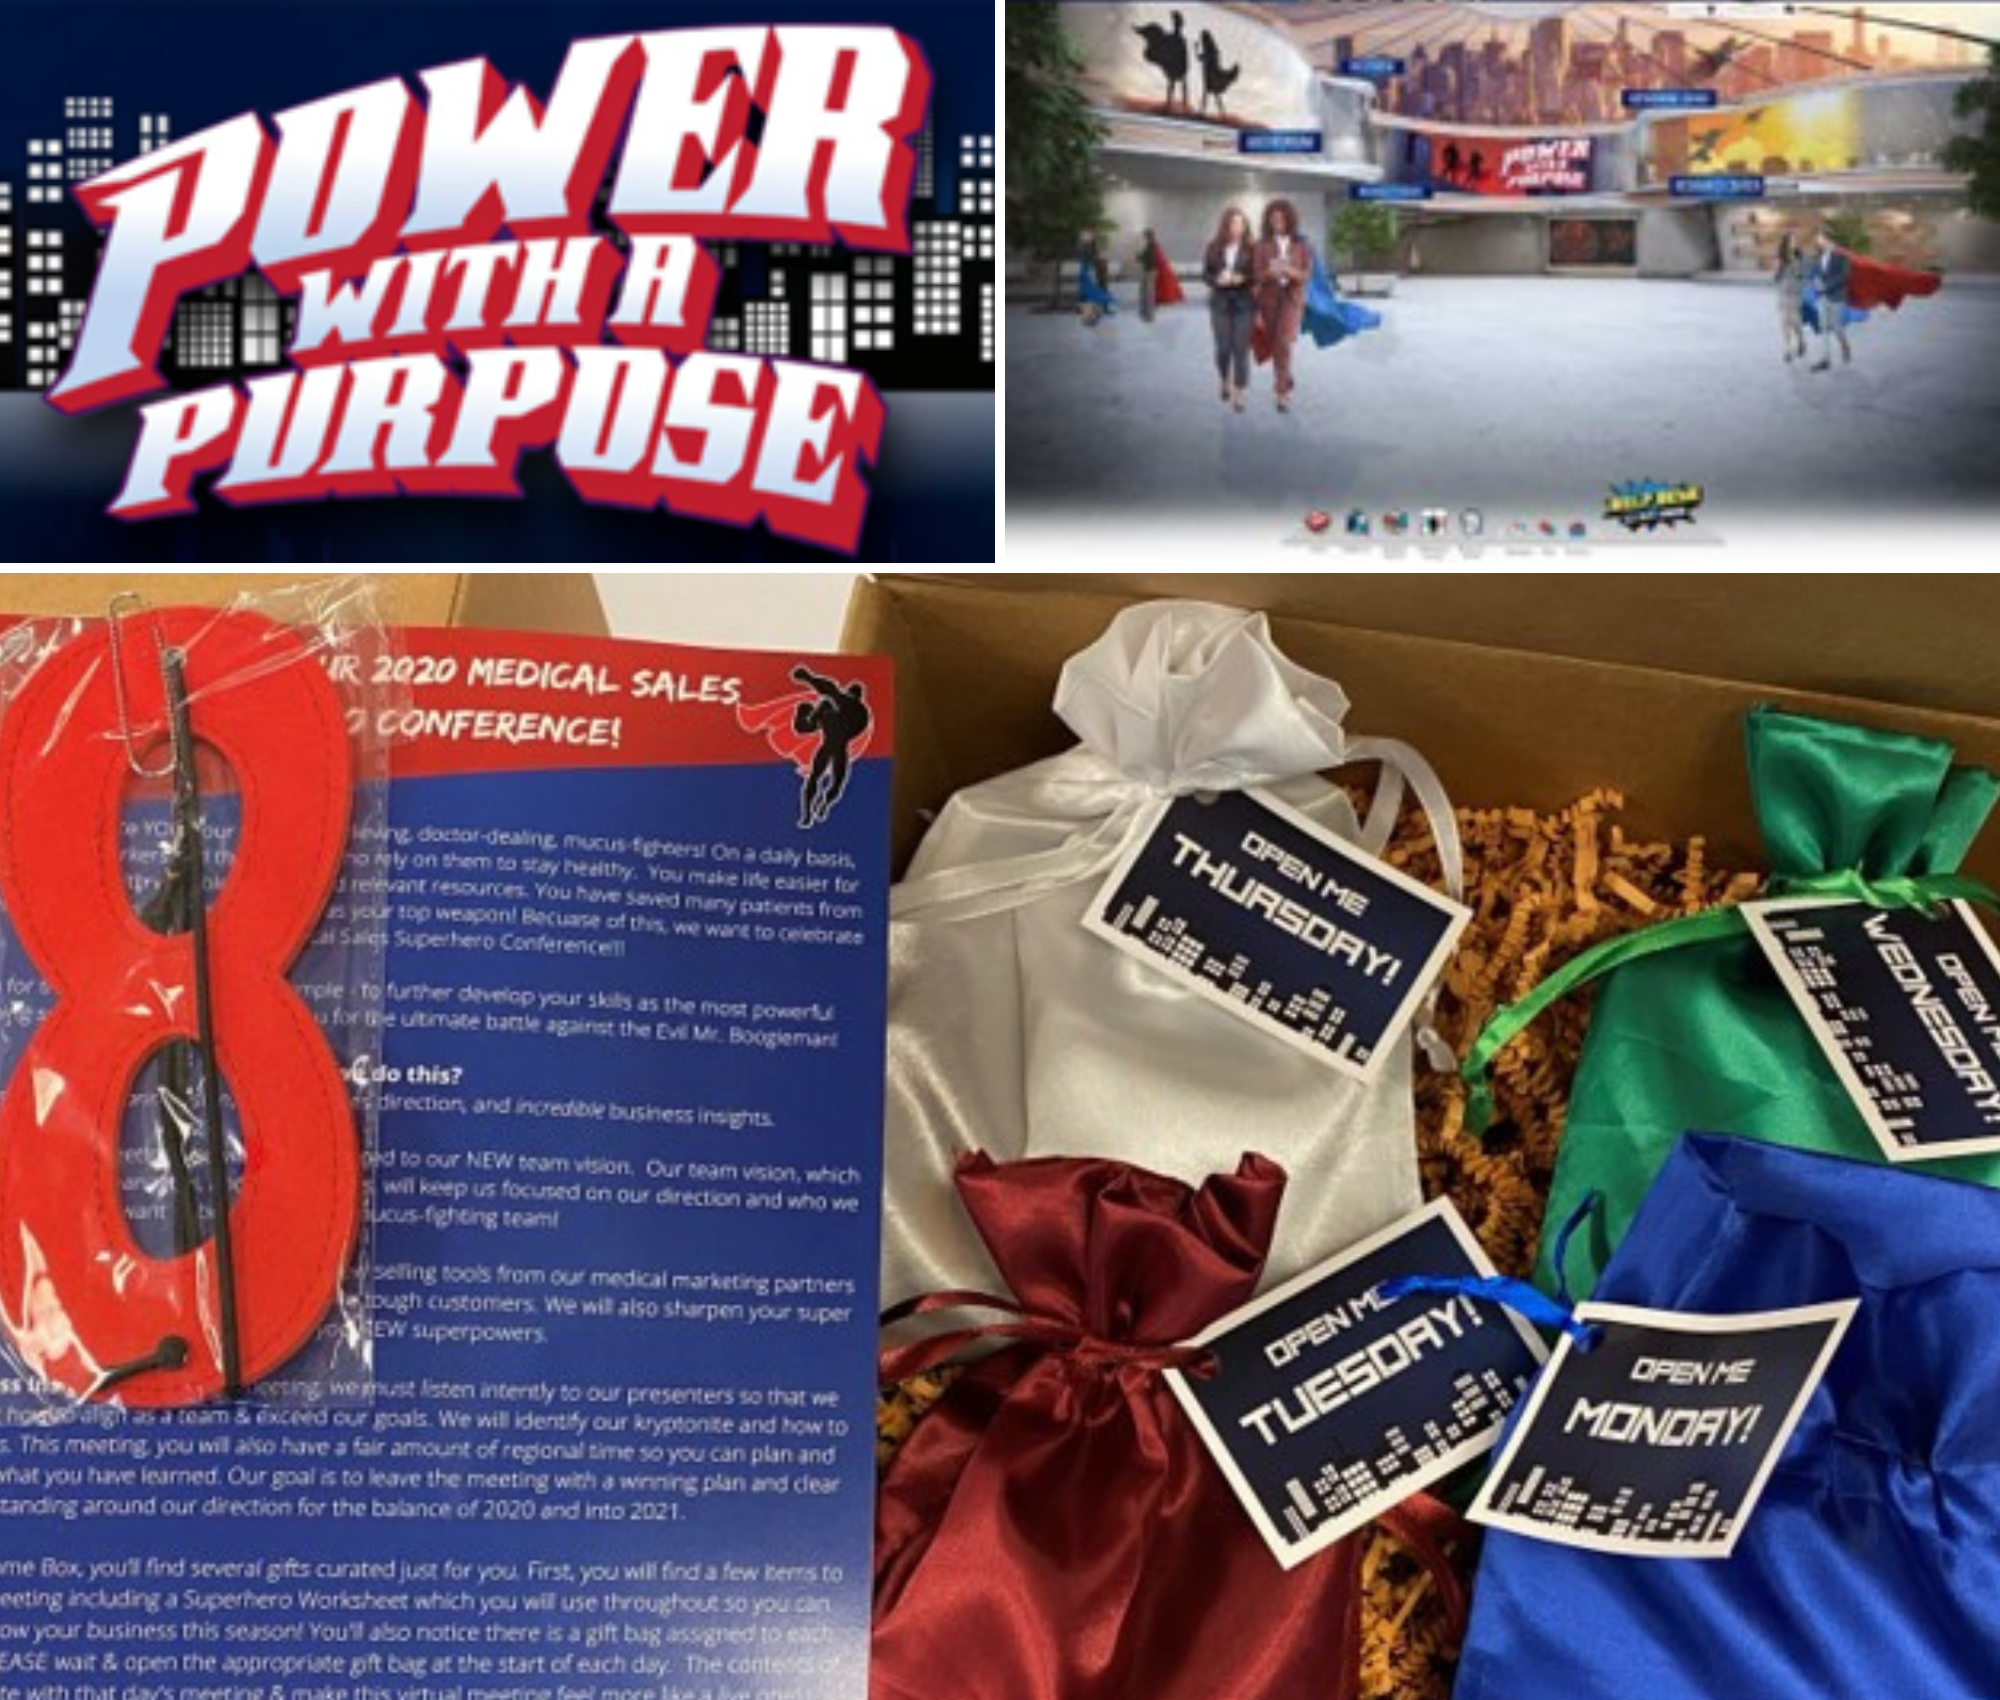 Power with a purpose theme of virtual event tied to dimensional mailer with superhero mask and other gifts